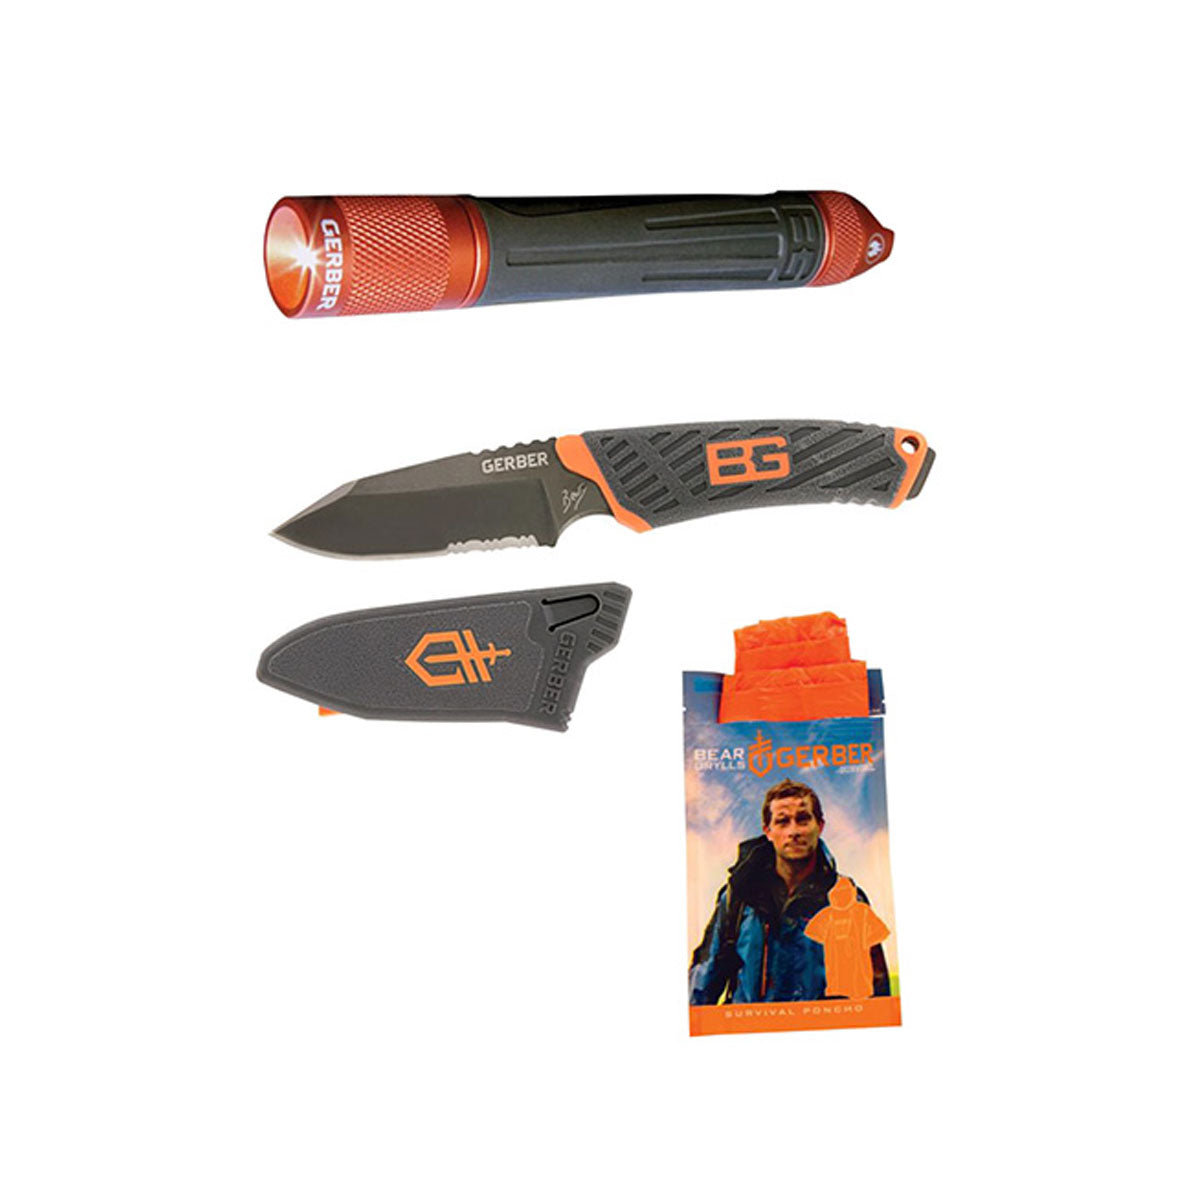 Gerber Bear Grylls Compact Fixed Blade Knife, Survival Torch & Poncho Combo - Outdoor Travel Gear 1